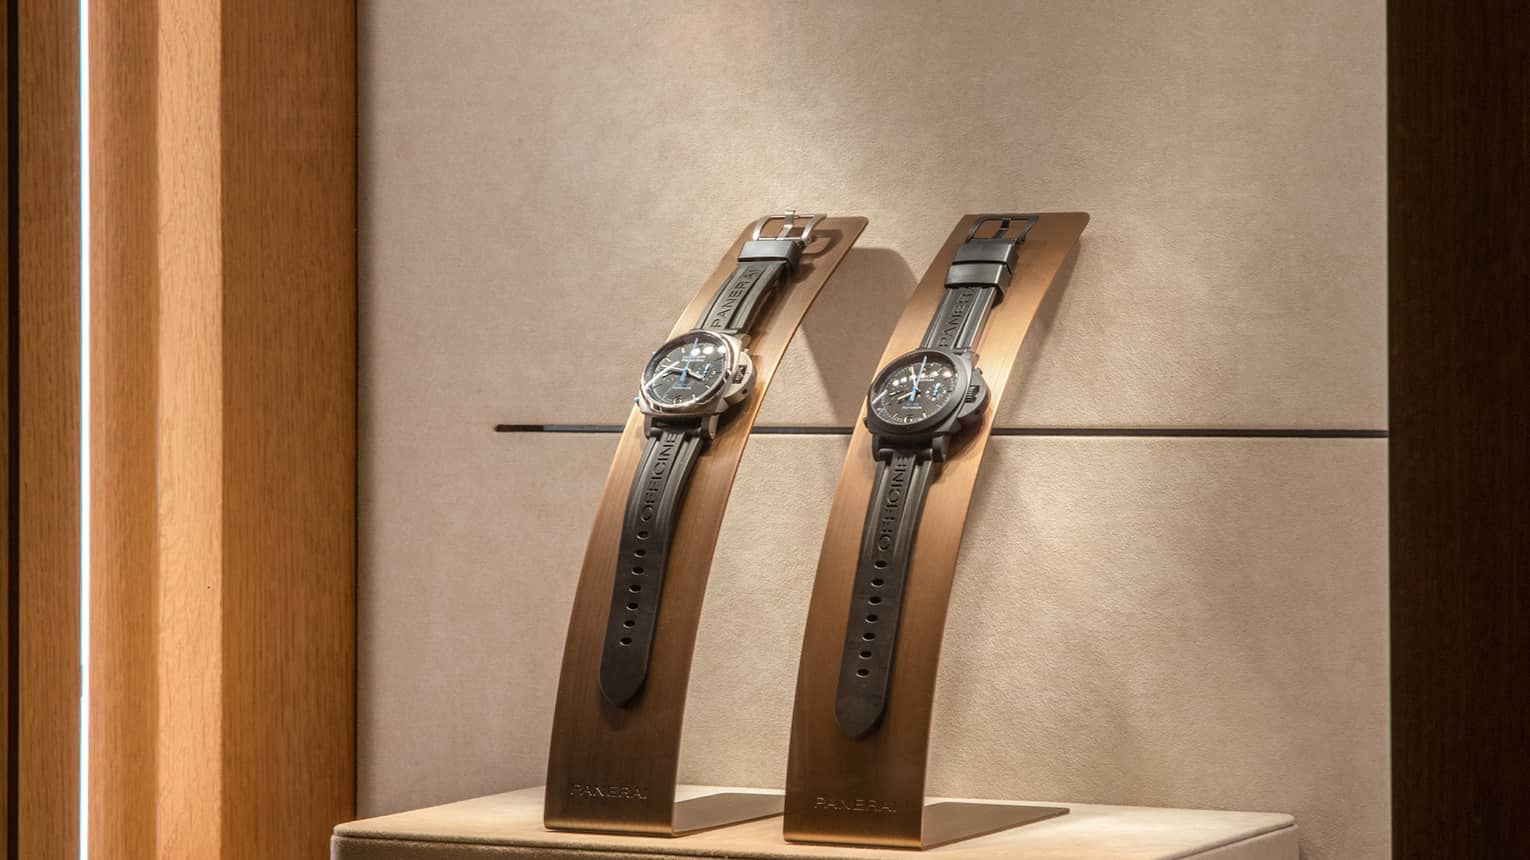 Panerai watches on display in boutique window